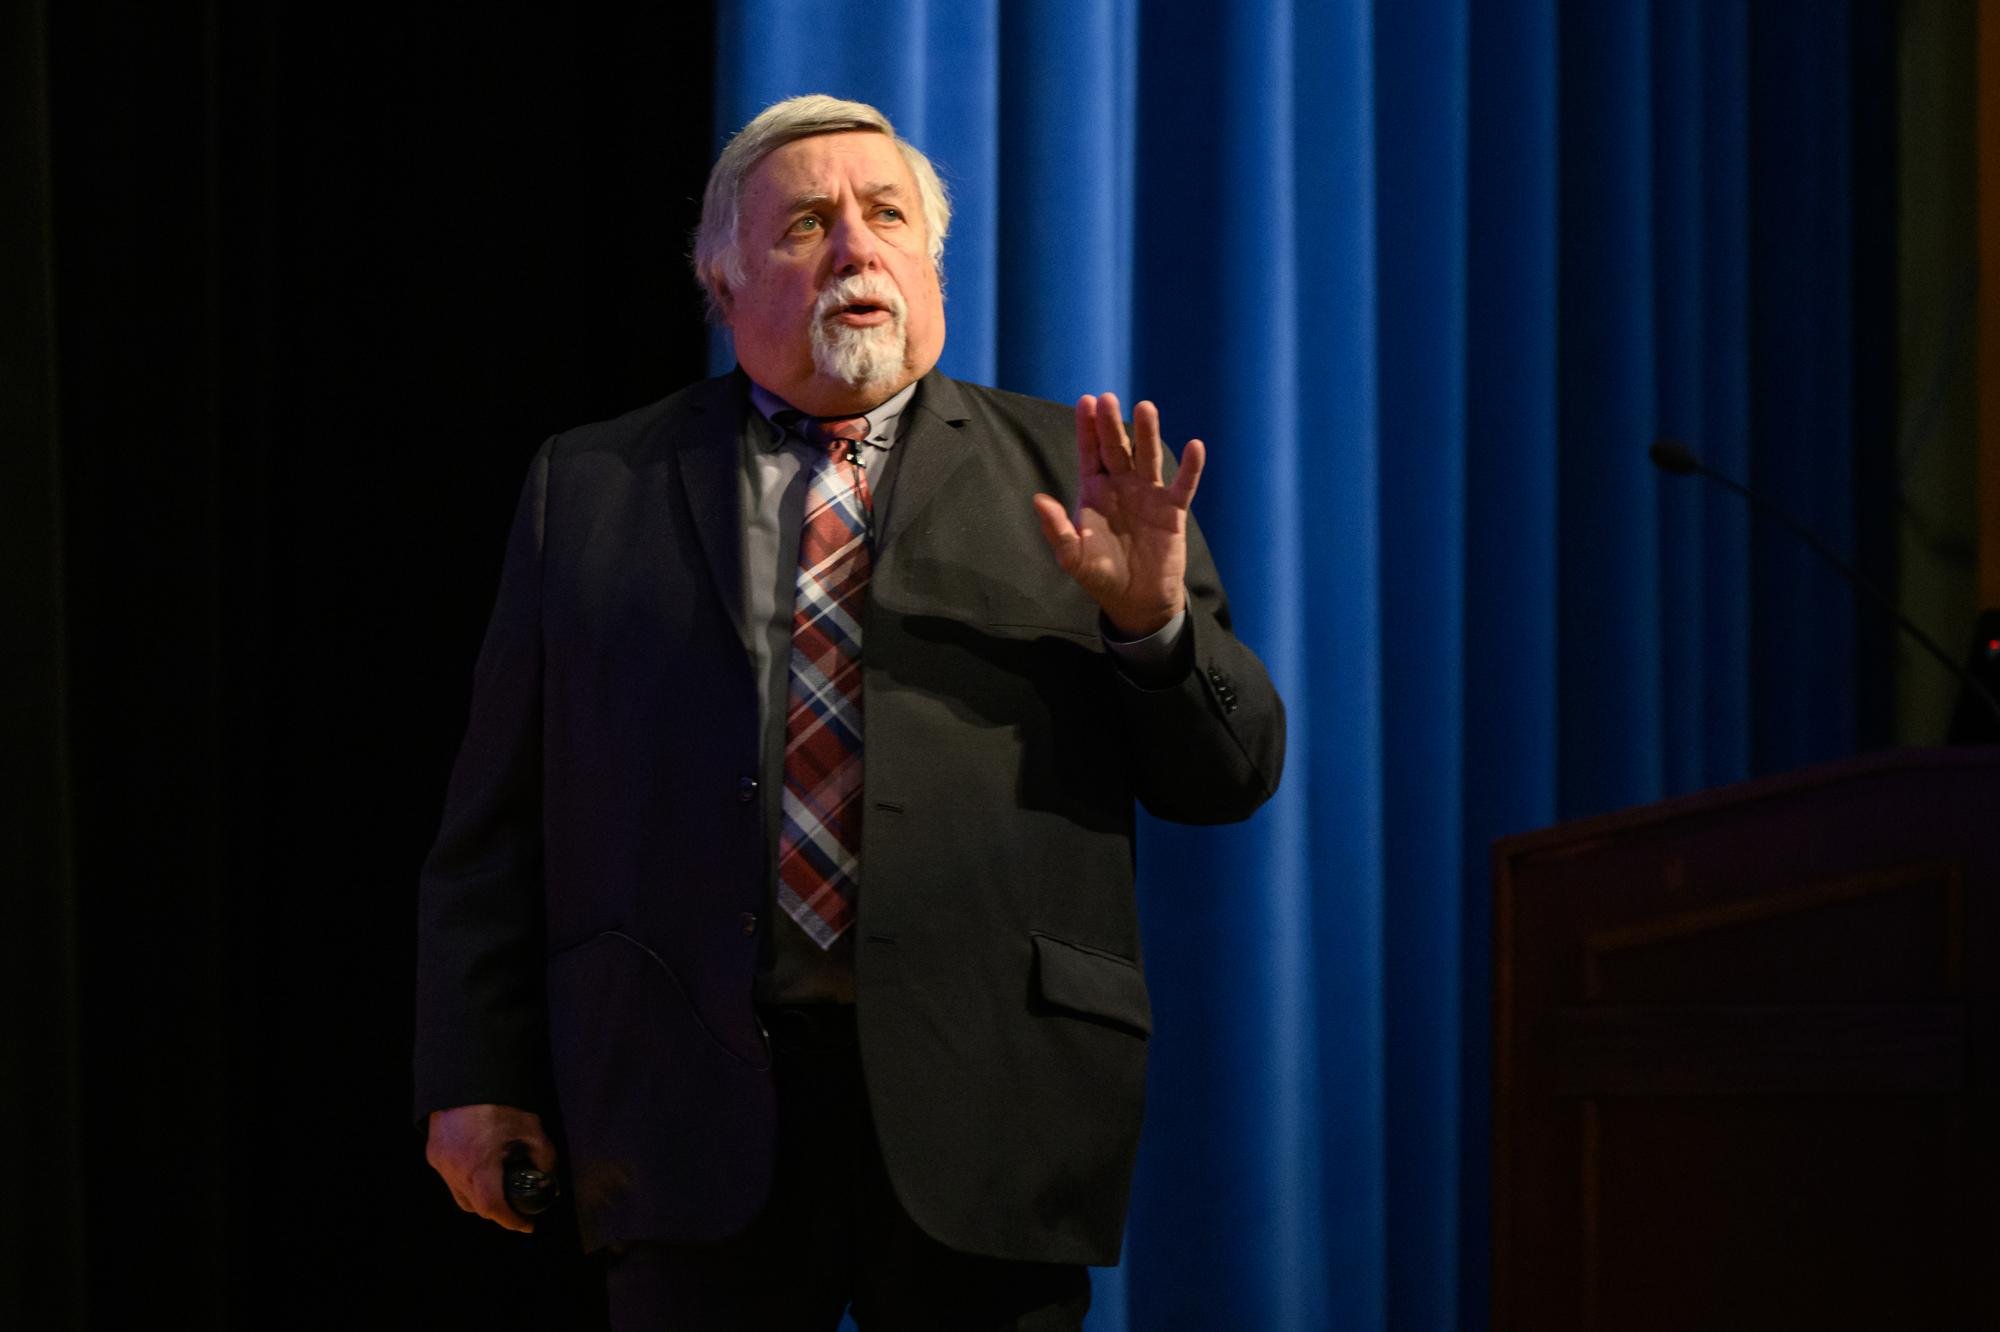   Dr. Kenneth Doka, a licensed mental health counselor and preeminent expert on grief, discussed modern theories on loss and grief in December at the Mount.  